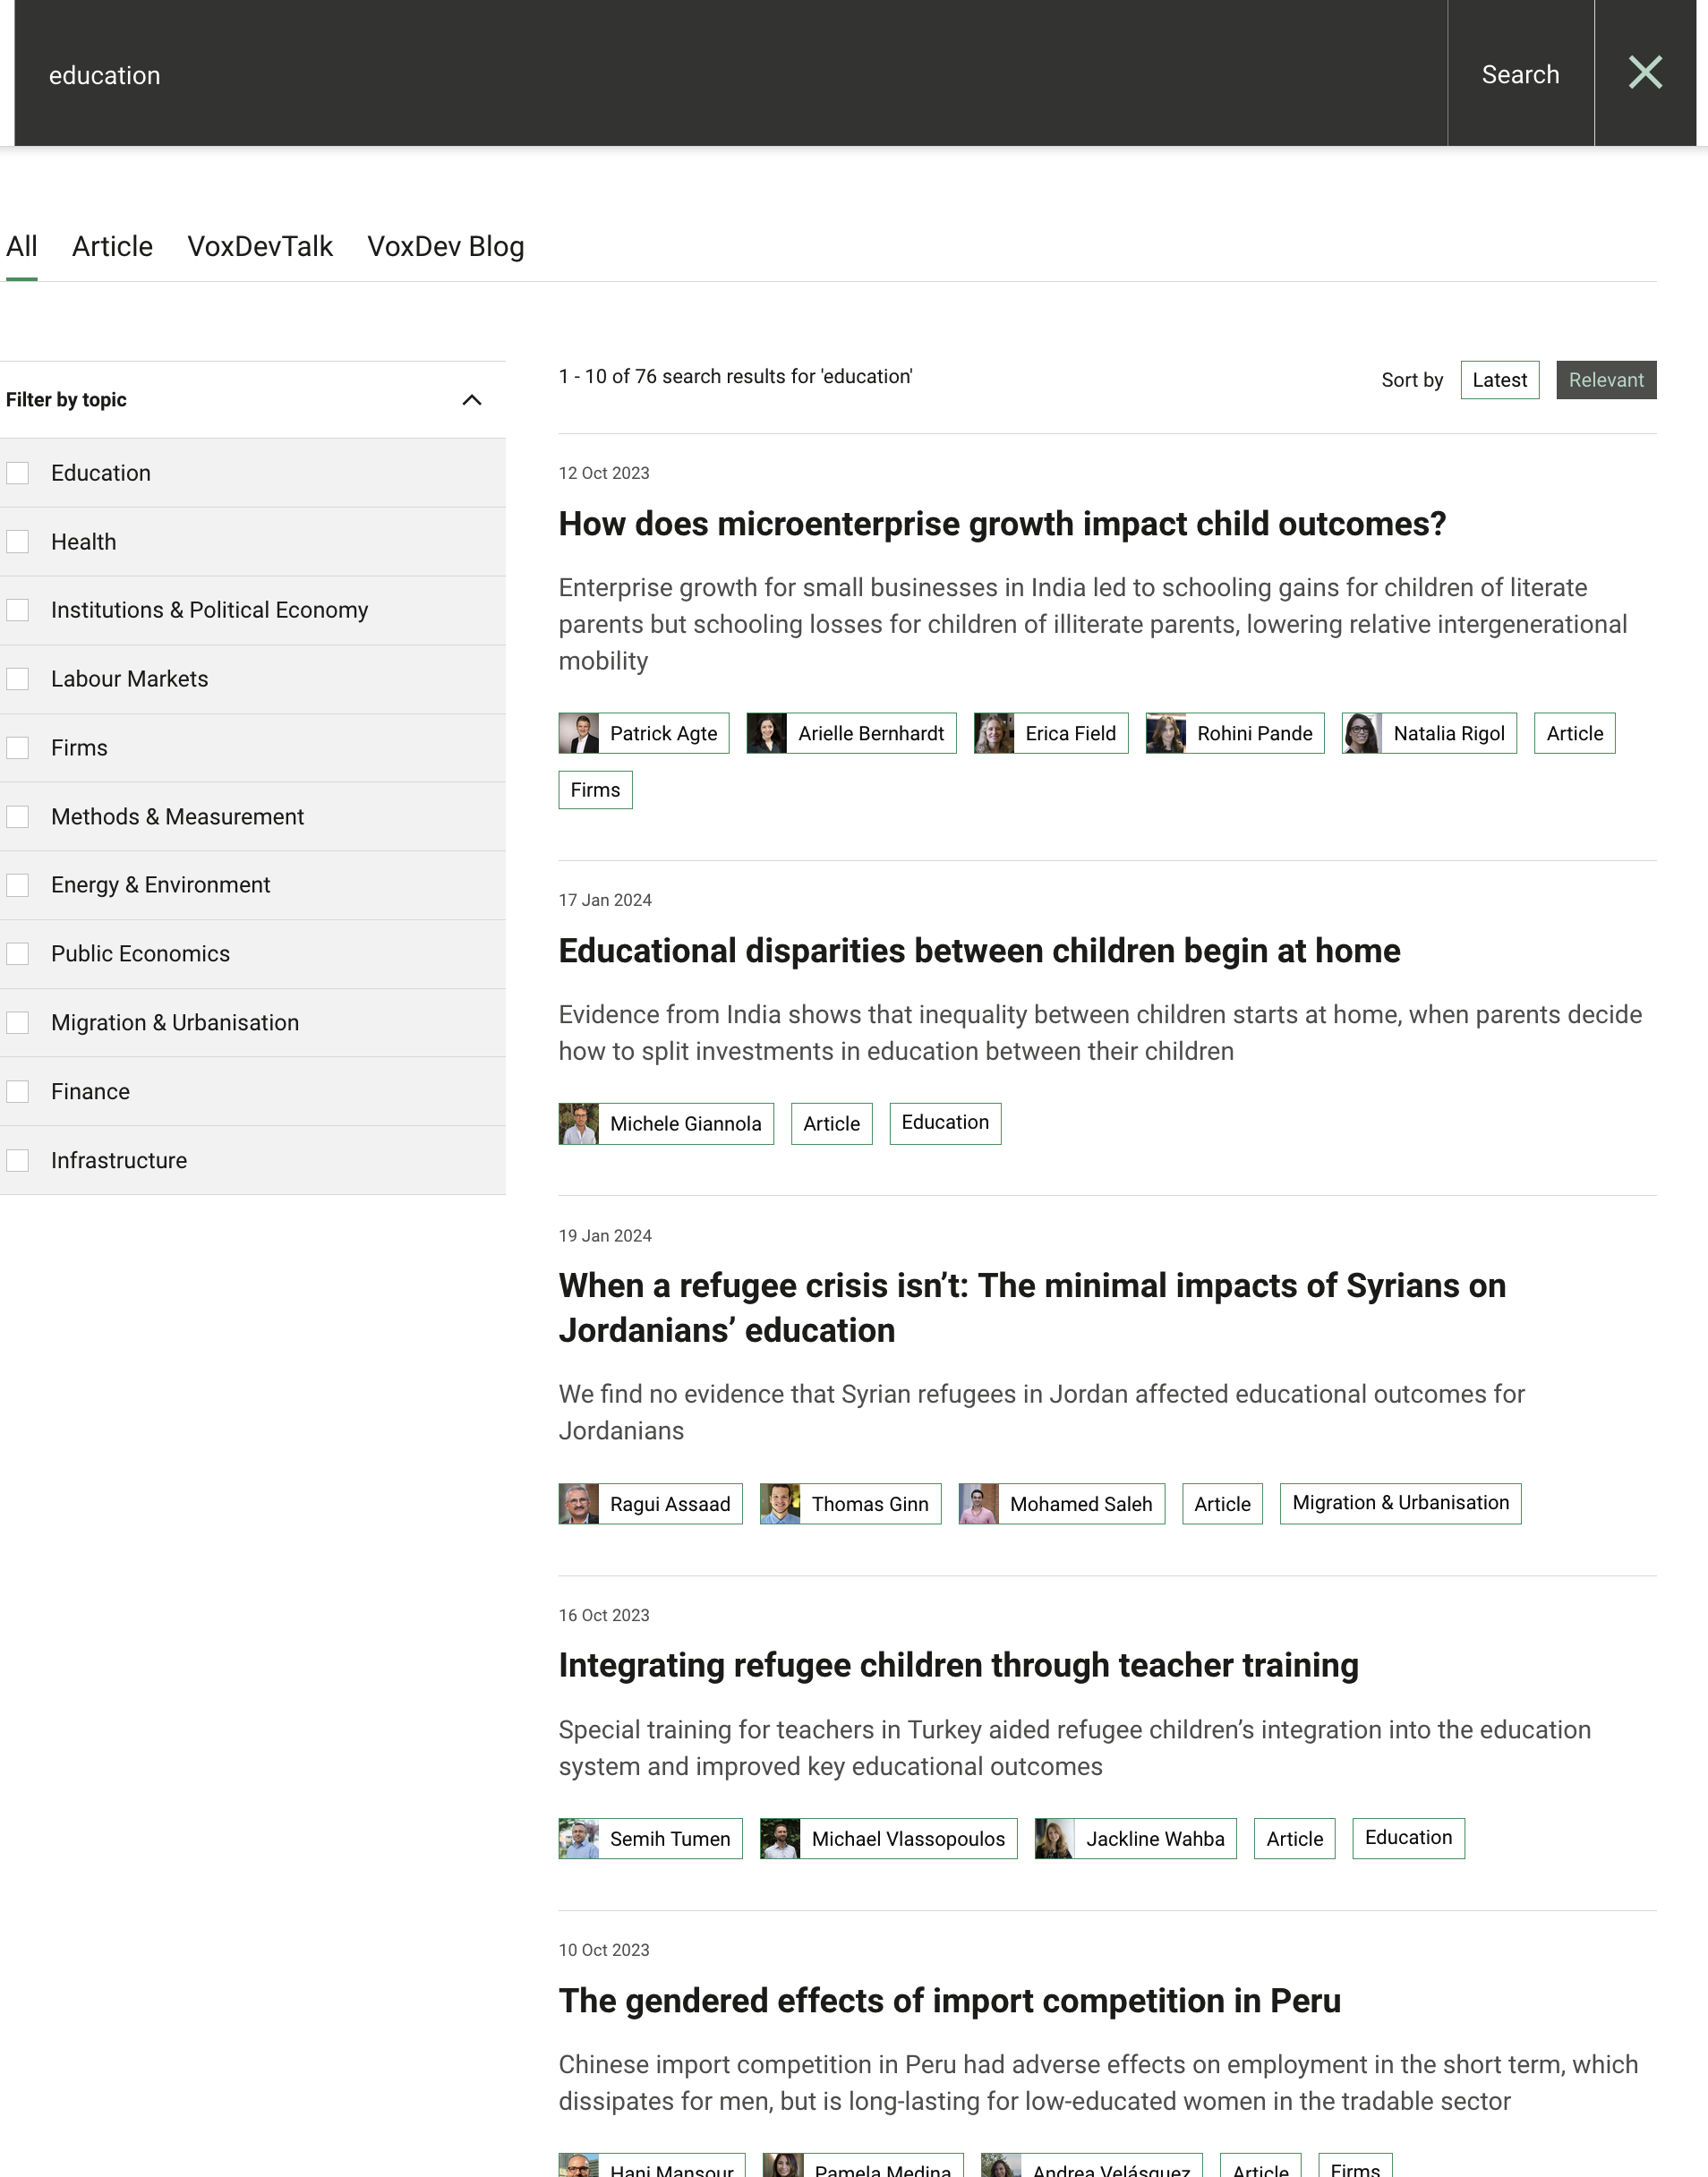 VoxDev.org: Search results View page - faceted Drupal search